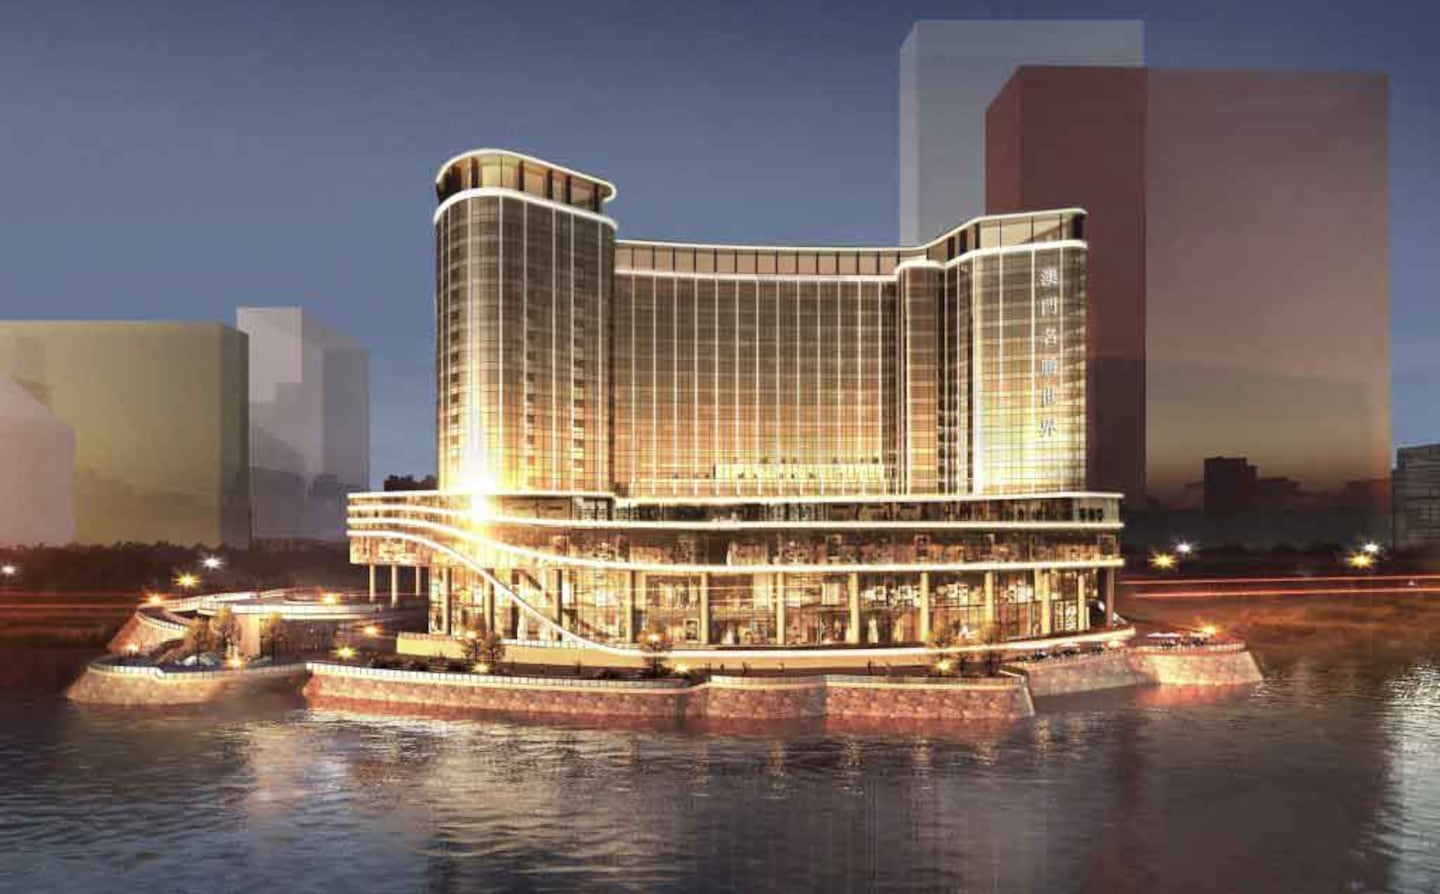 The Treasure Island Hotel Macau development will include five storeys of retail, including the latest Chinese outpost of Galeries Lafayette.